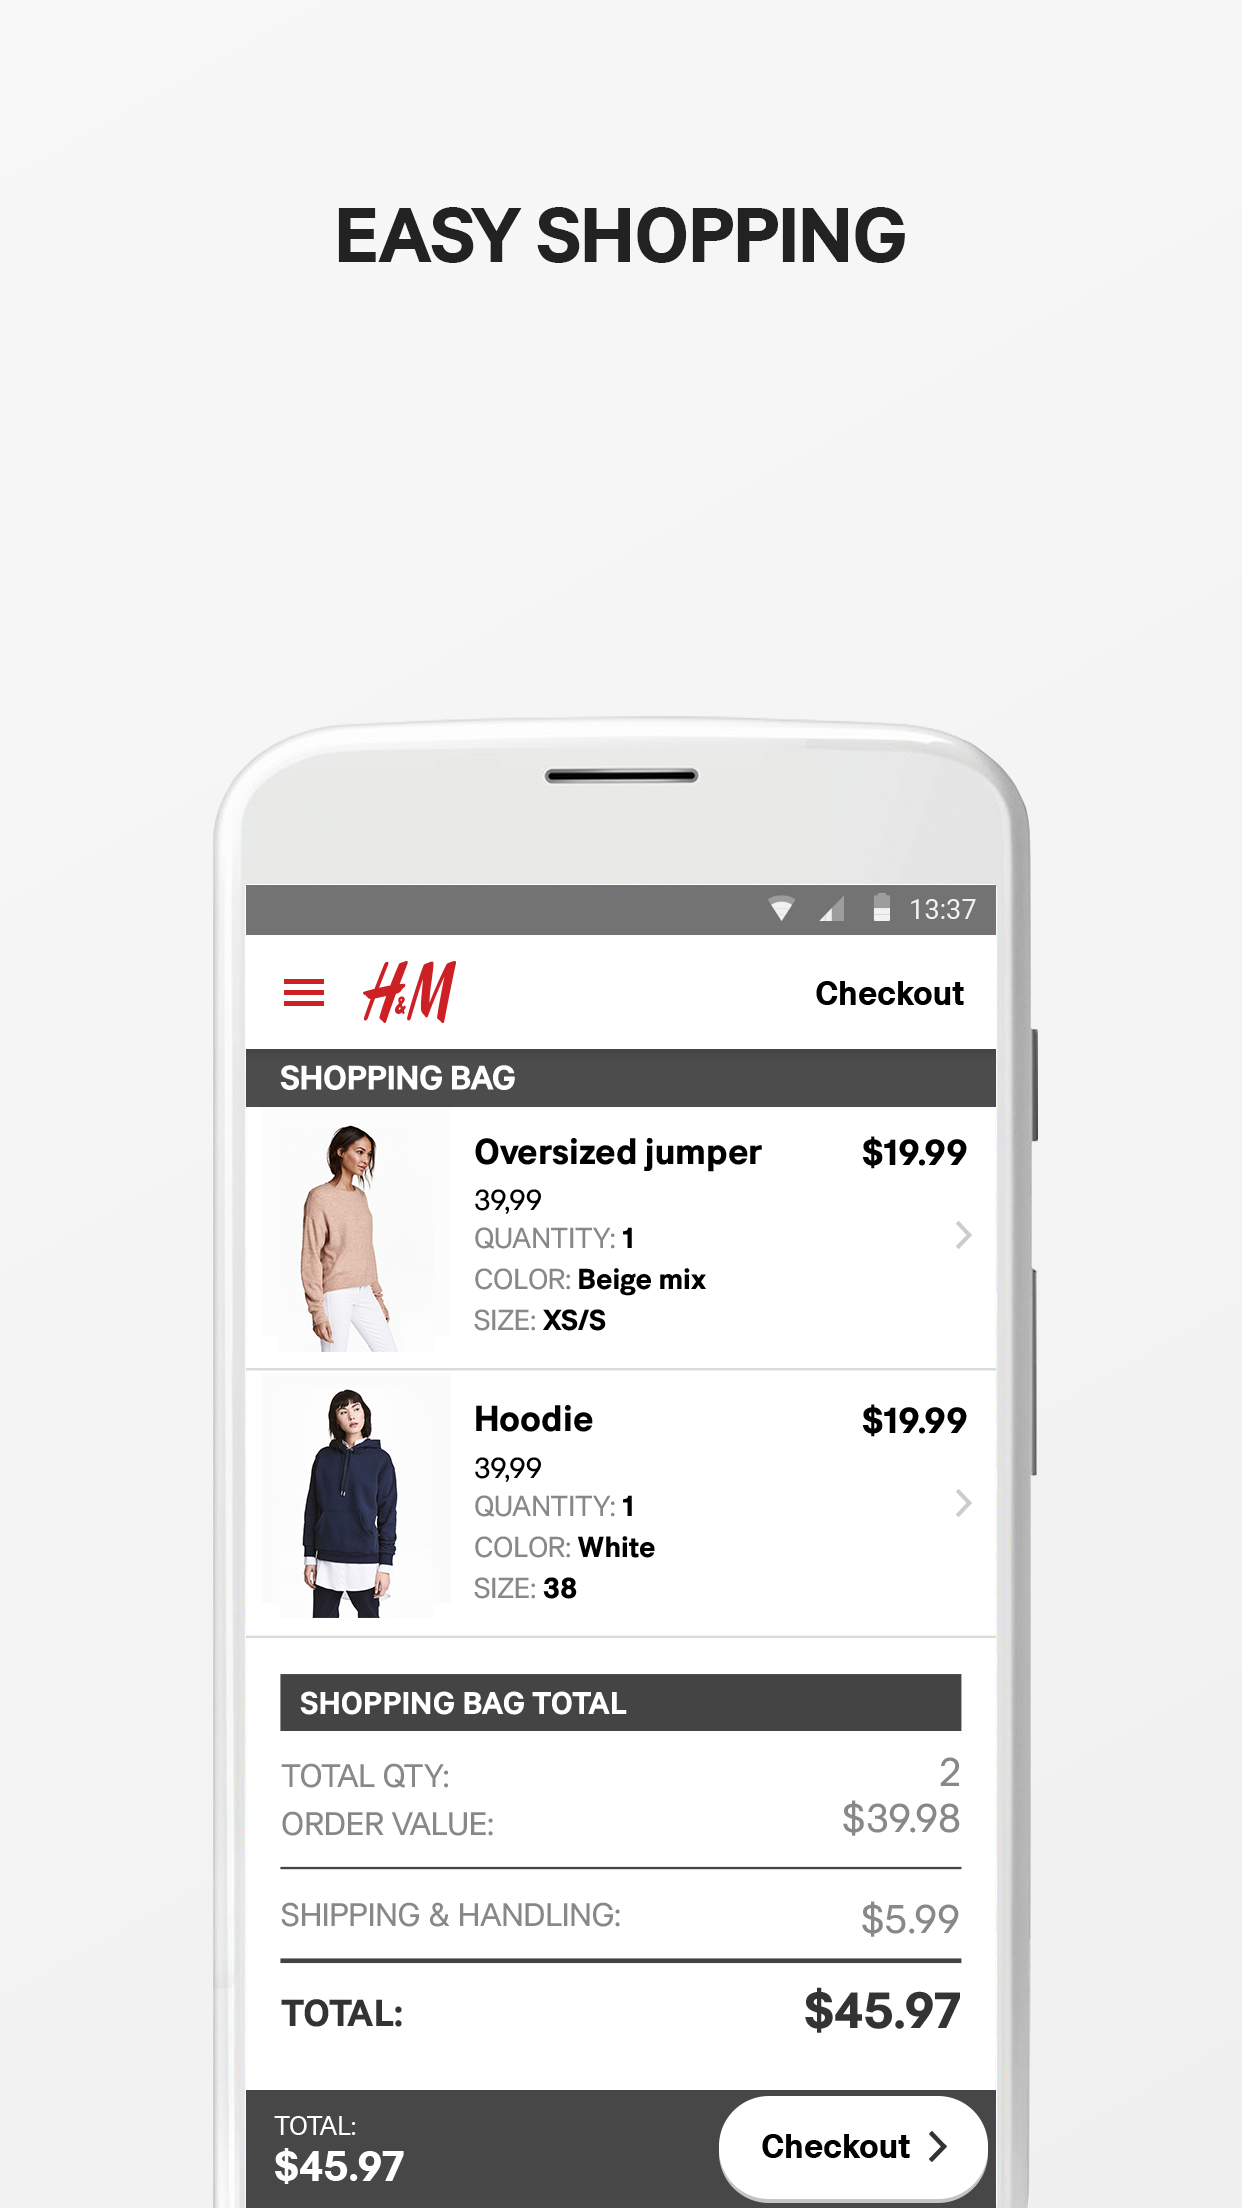 H&M APK 2.49.0 for Android – Download H&M APK Latest Version from APKFab.com